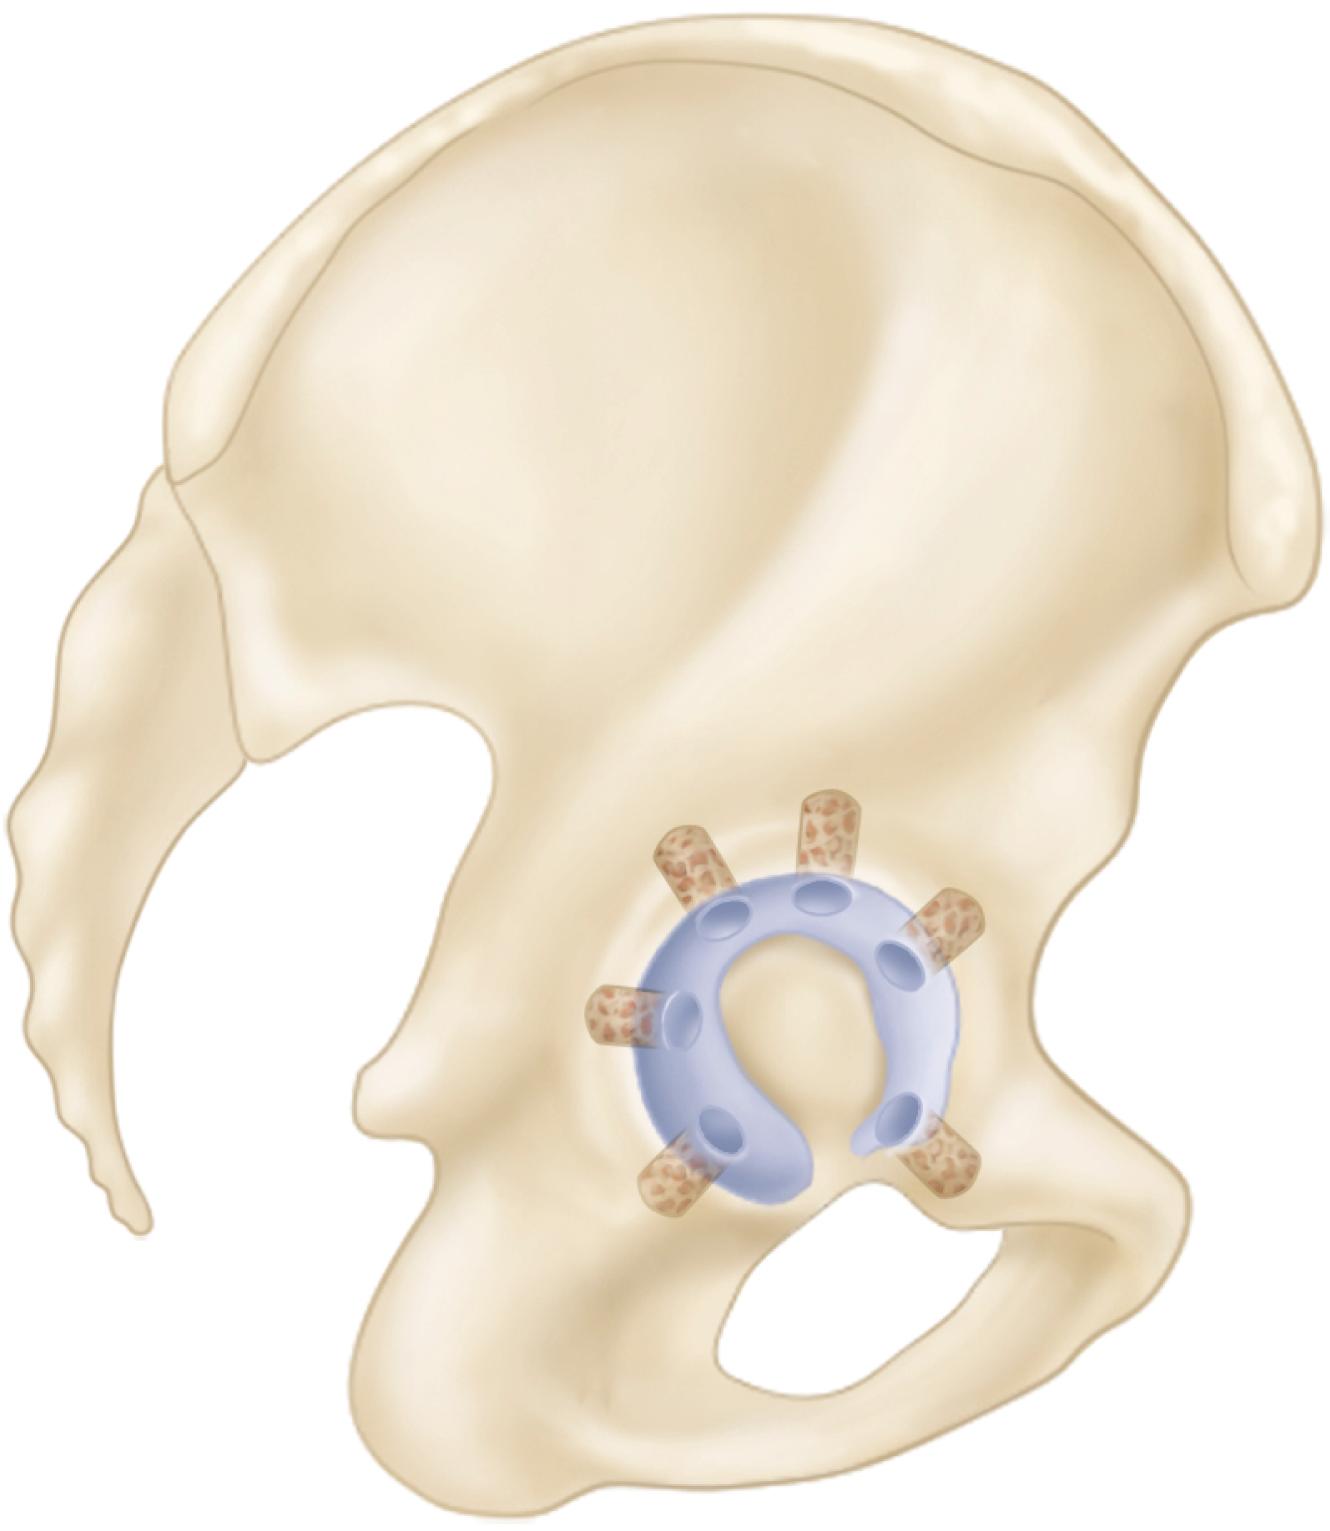 FIGURE 3.48, Fixation holes for cement in acetabulum. SEE TECHNIQUE 3.4.